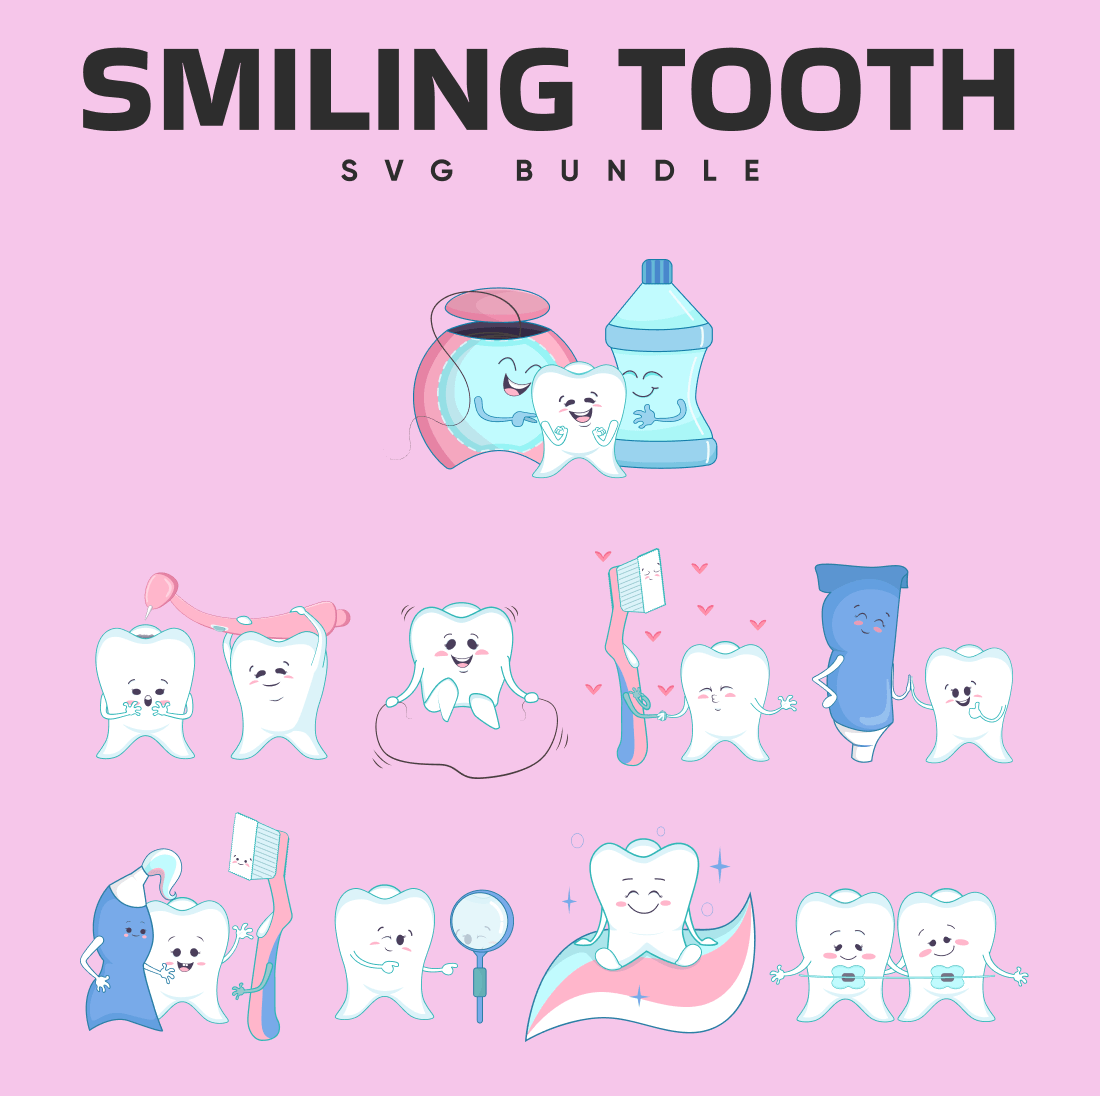 Ten smiling teeth with toothpaste and toothbrushes.